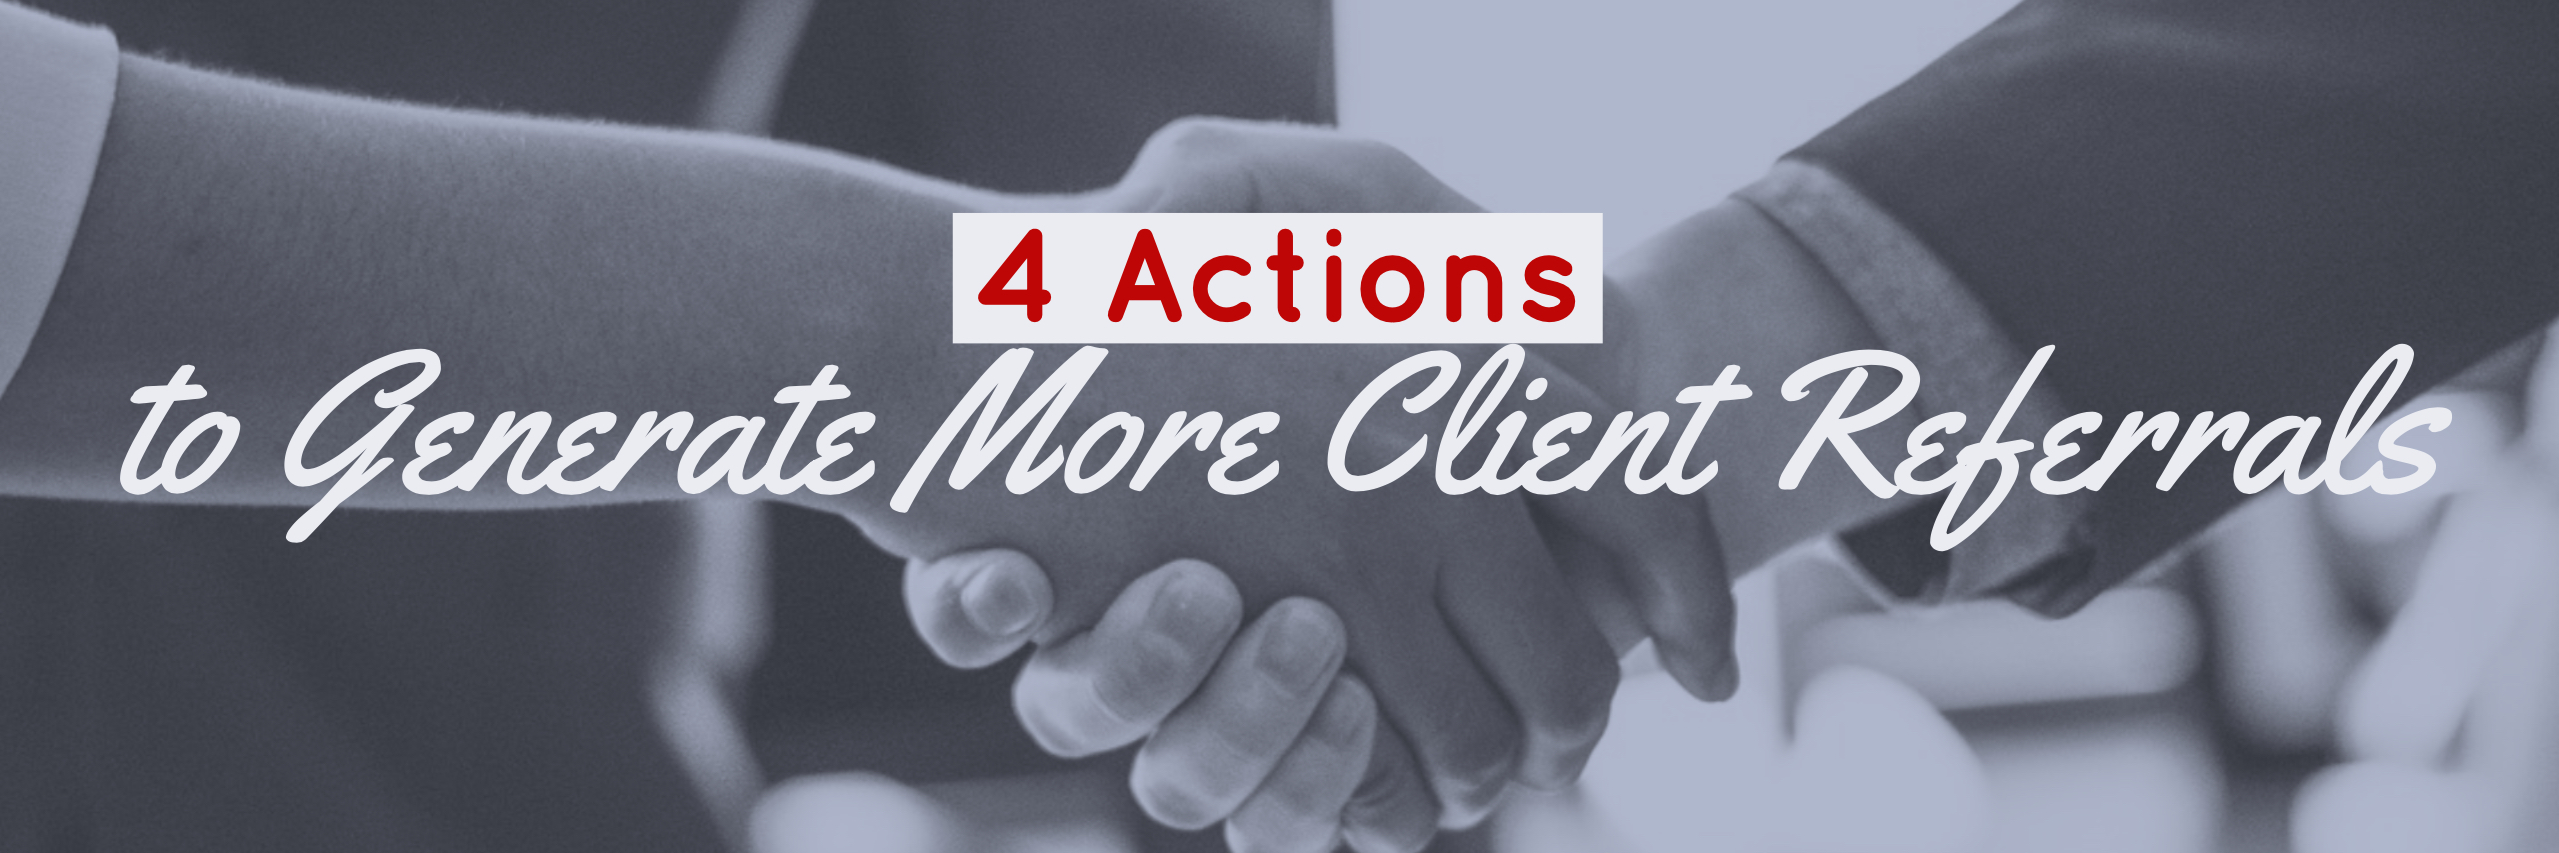 4 Actions to Generate More Client Referrals